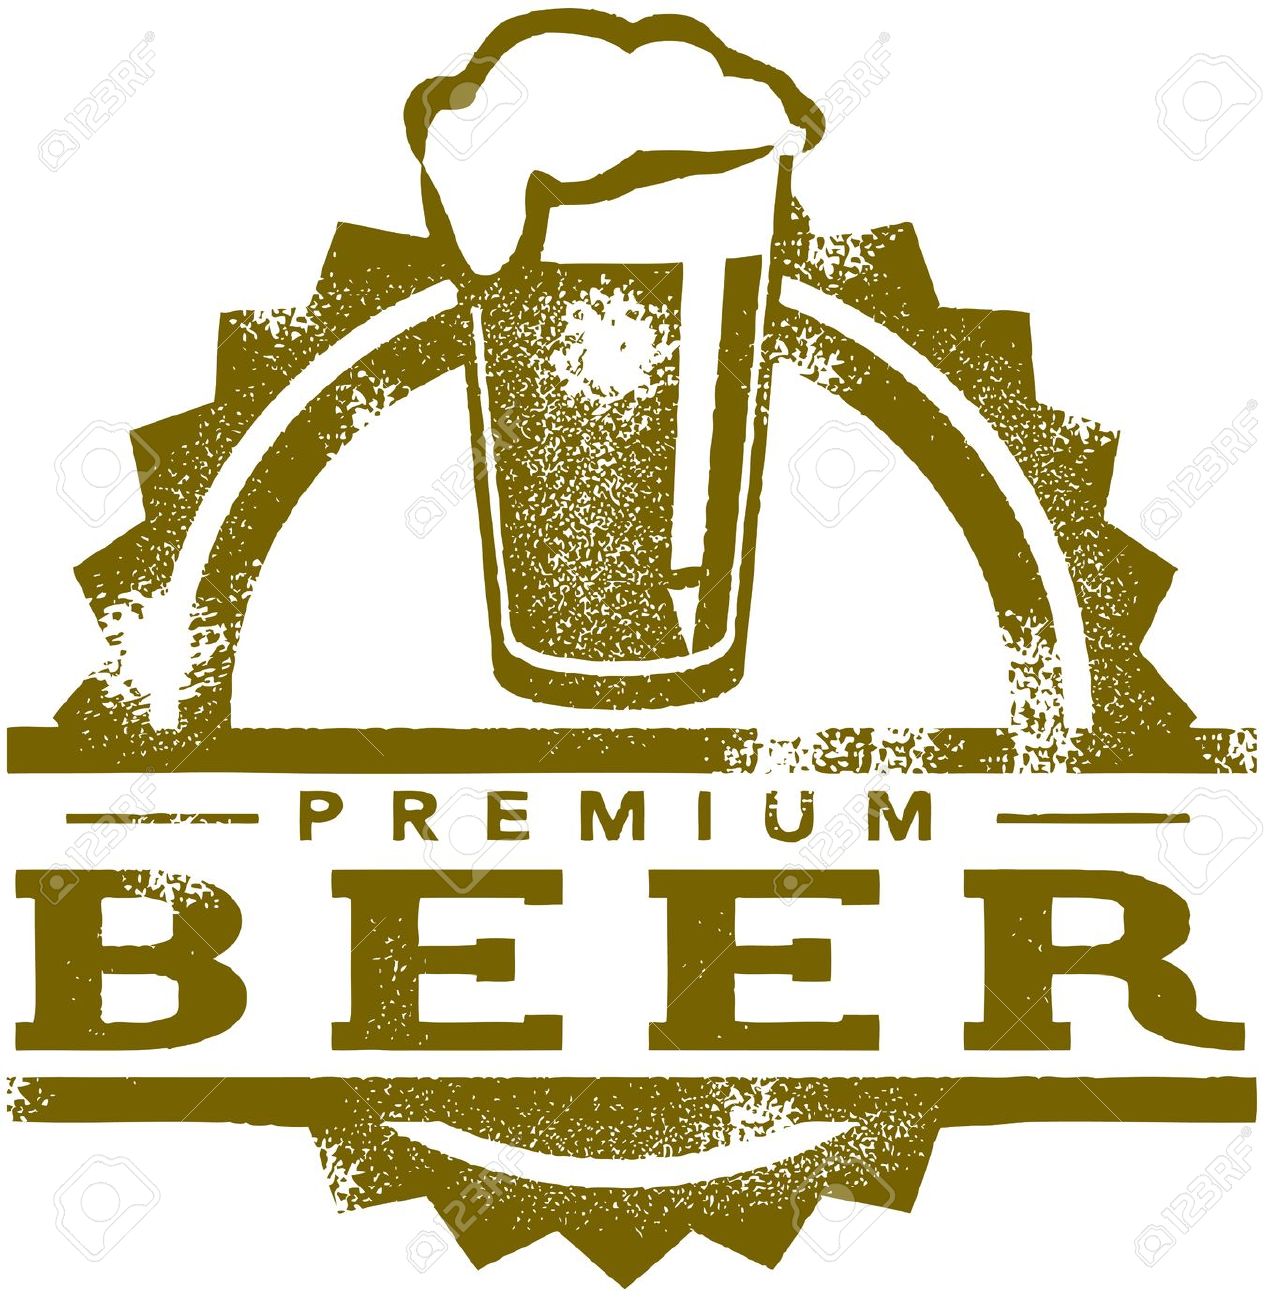 Craft beer clipart craft beer clip art vector related to craft